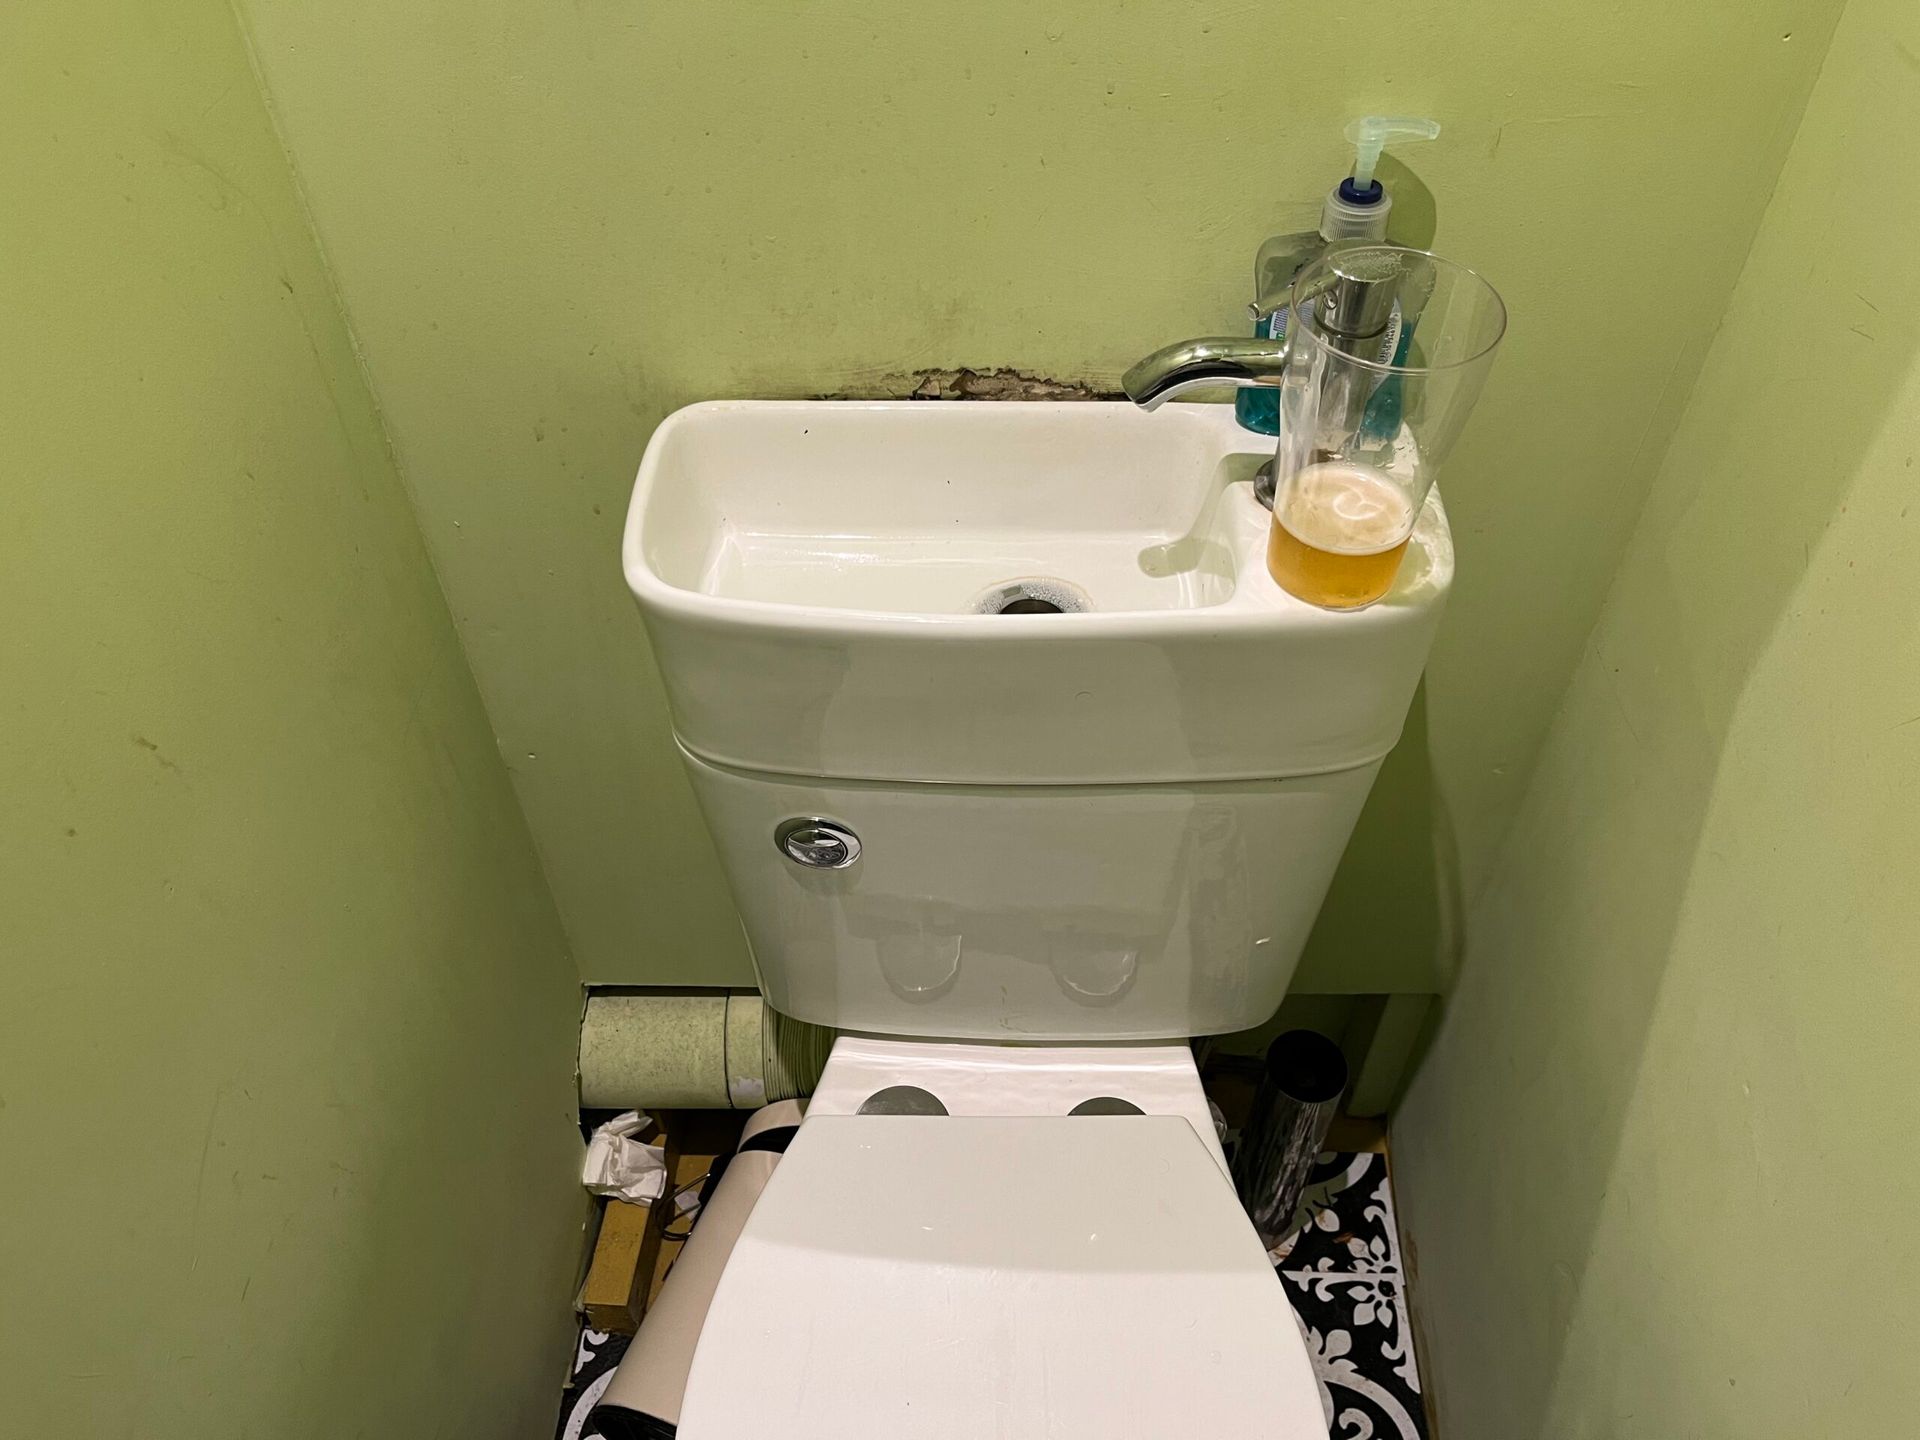 Toilet with a sink in the cistern saving space. In a lime green cubical